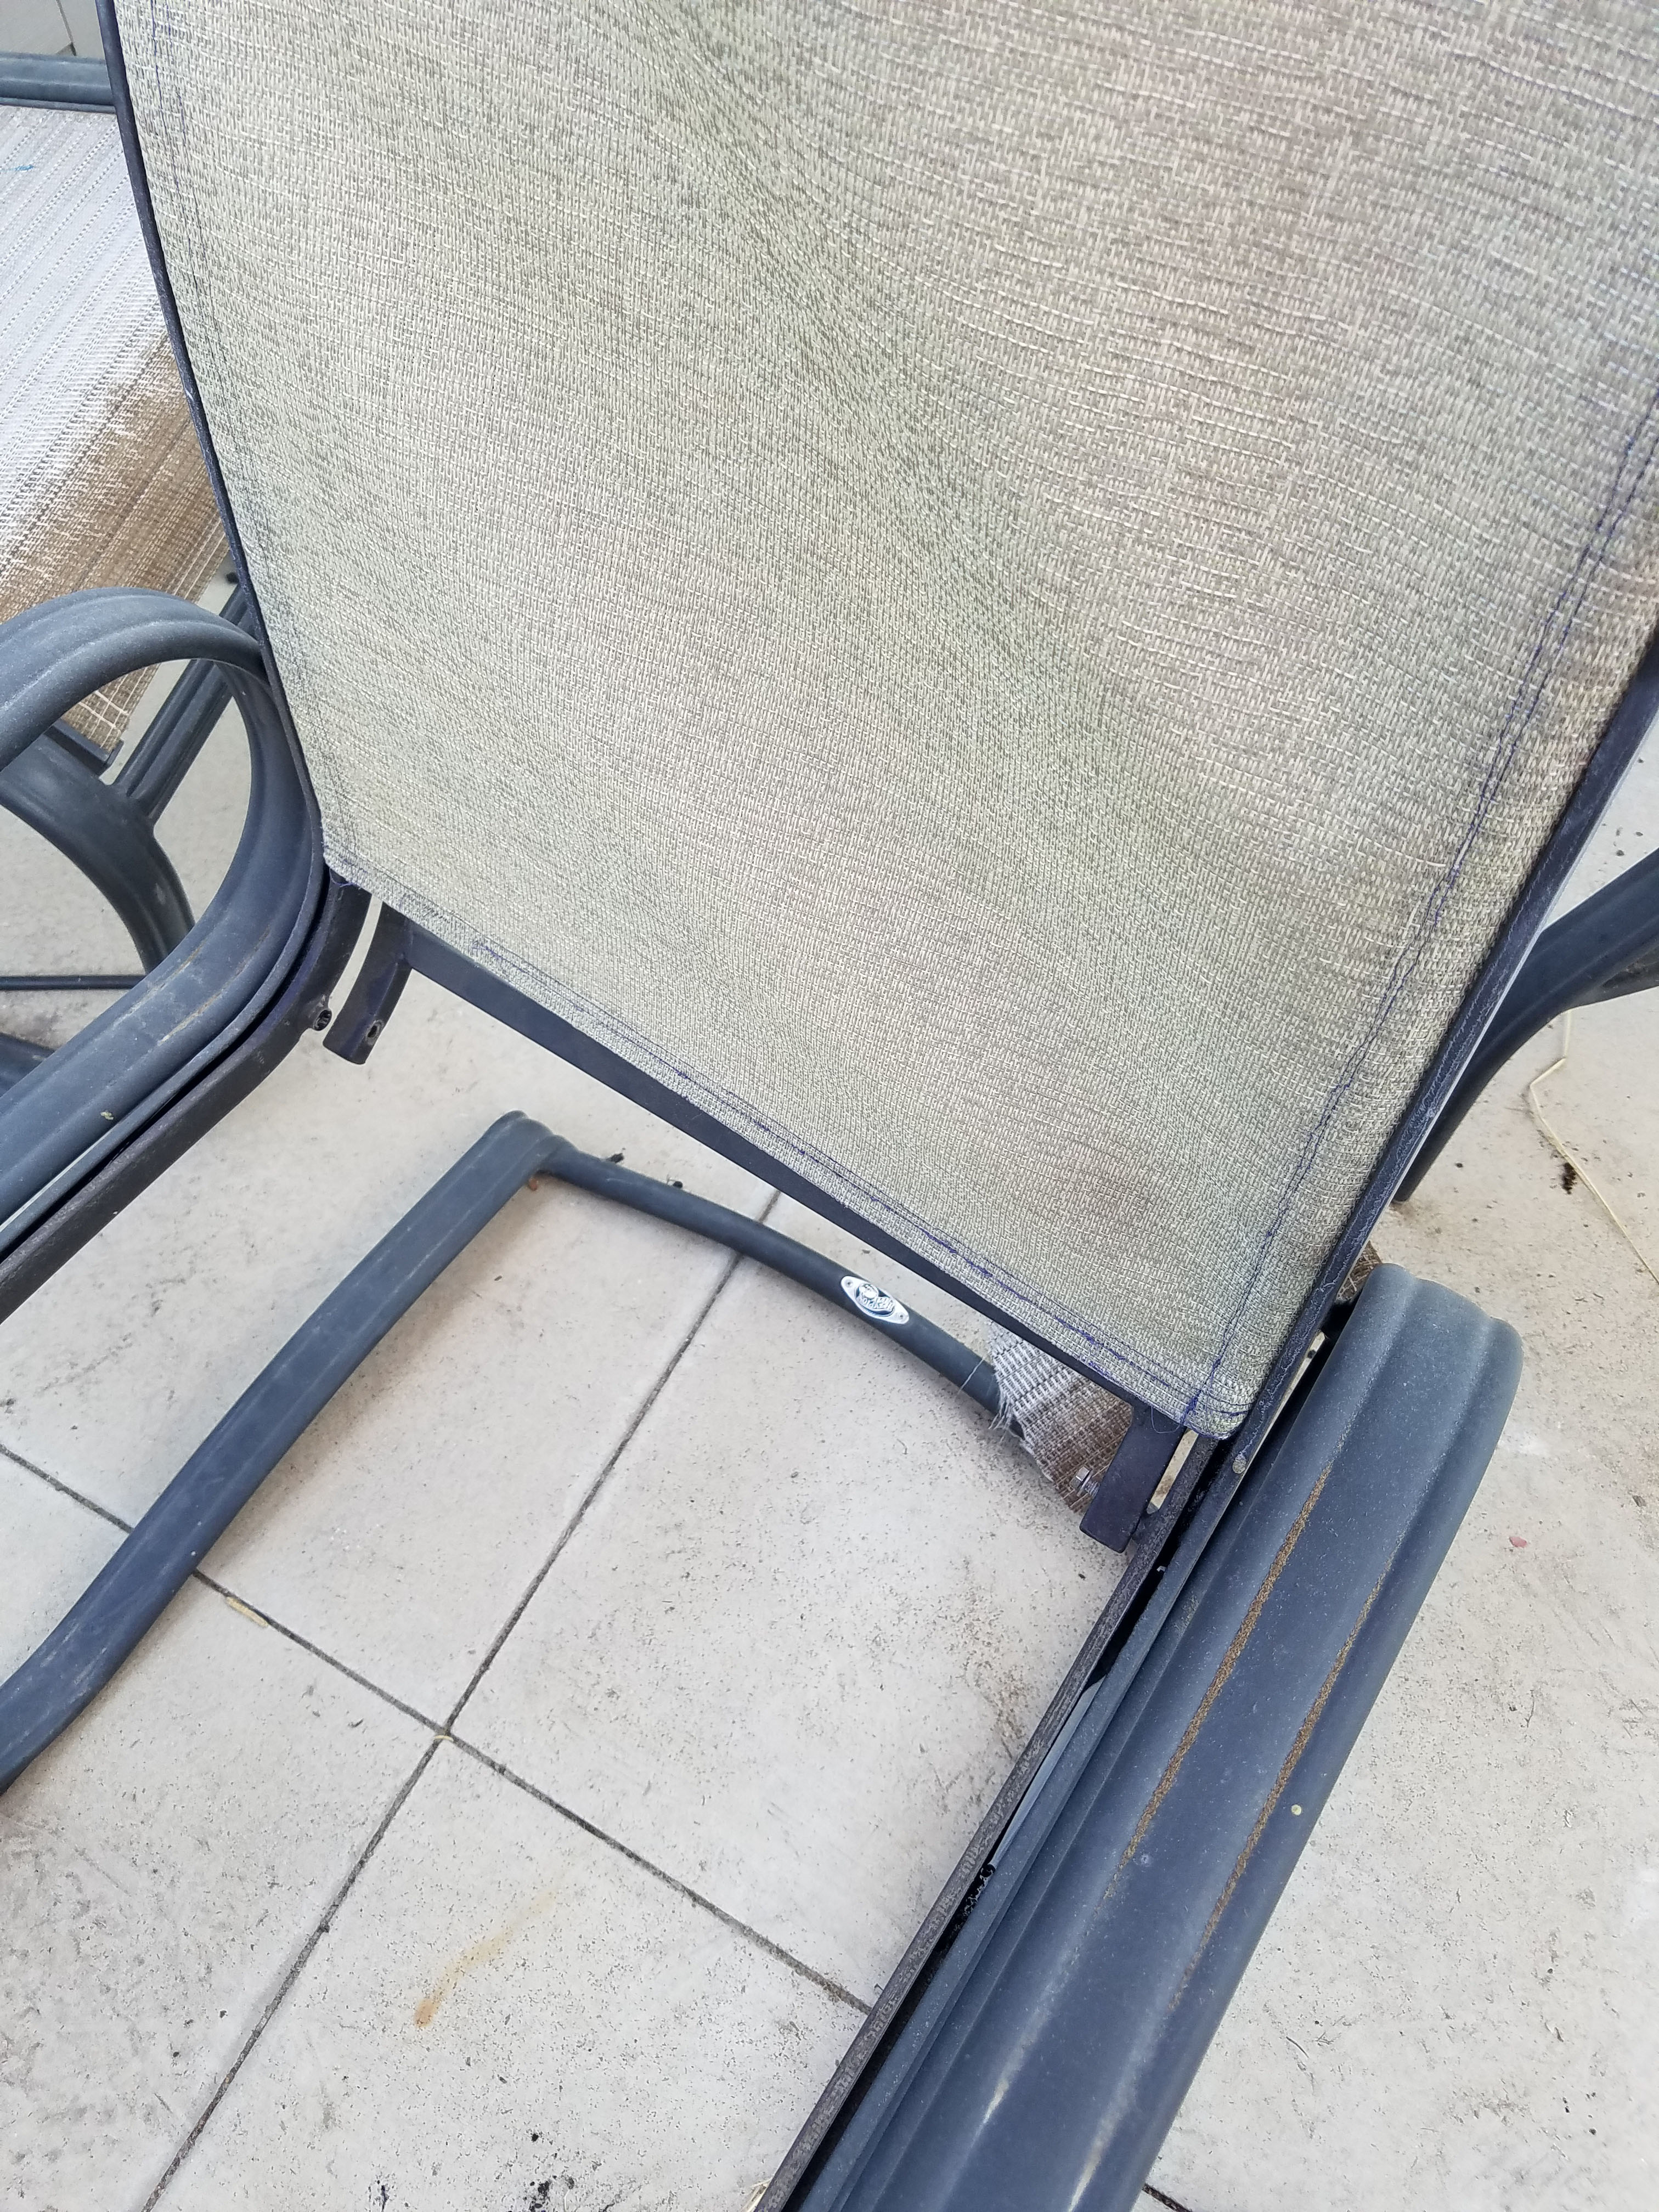 Sling Patio Chair